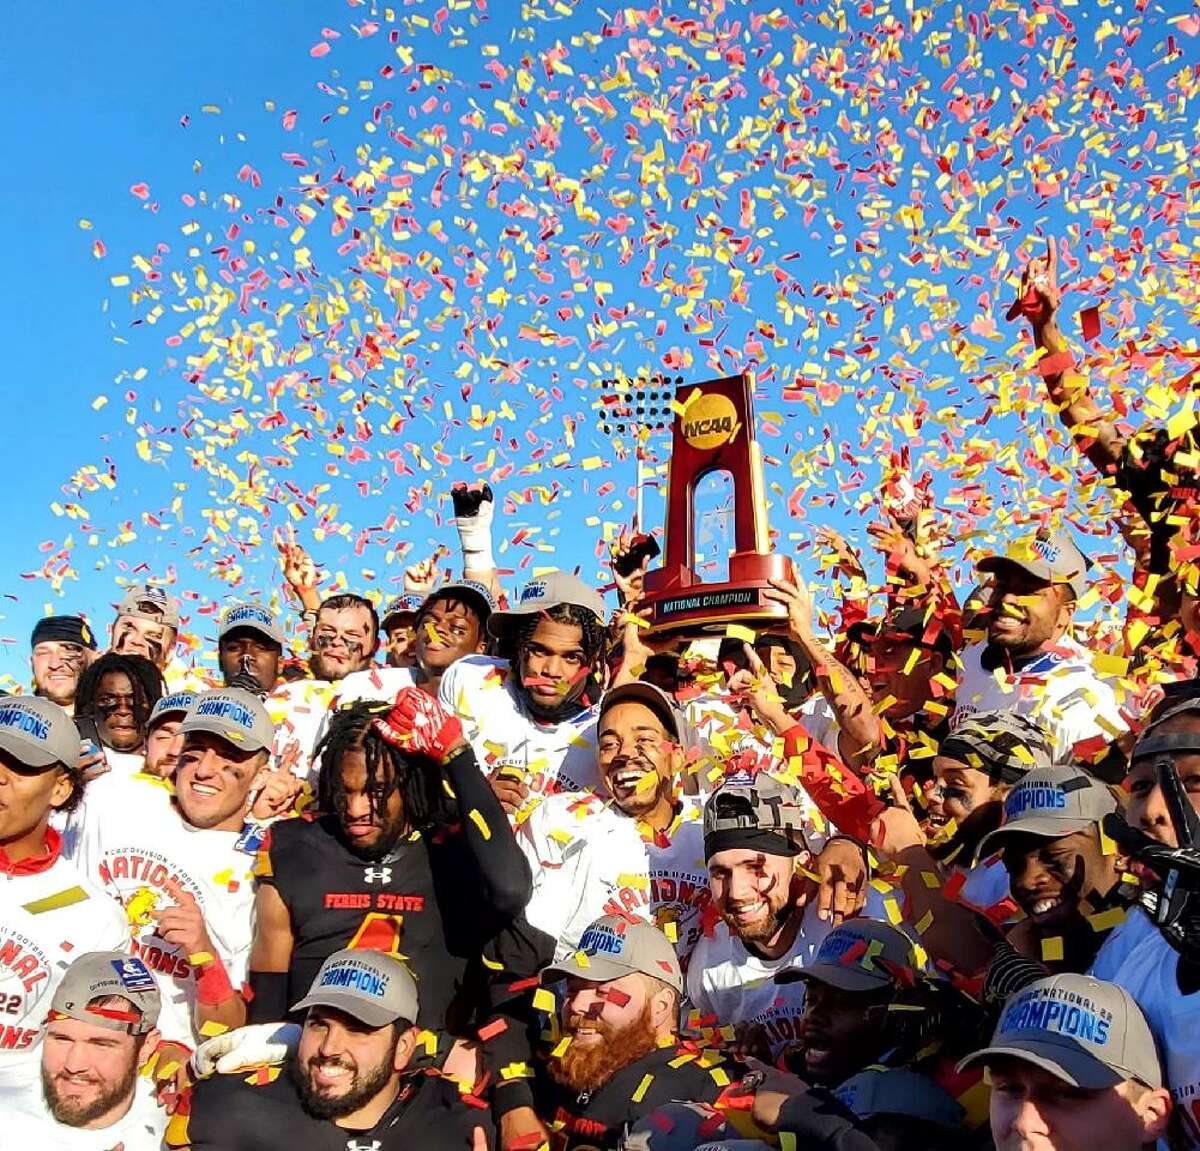 The Ferris State University football team is recognized by local officials for its second consecutive NCAA Division II Football national championship title.